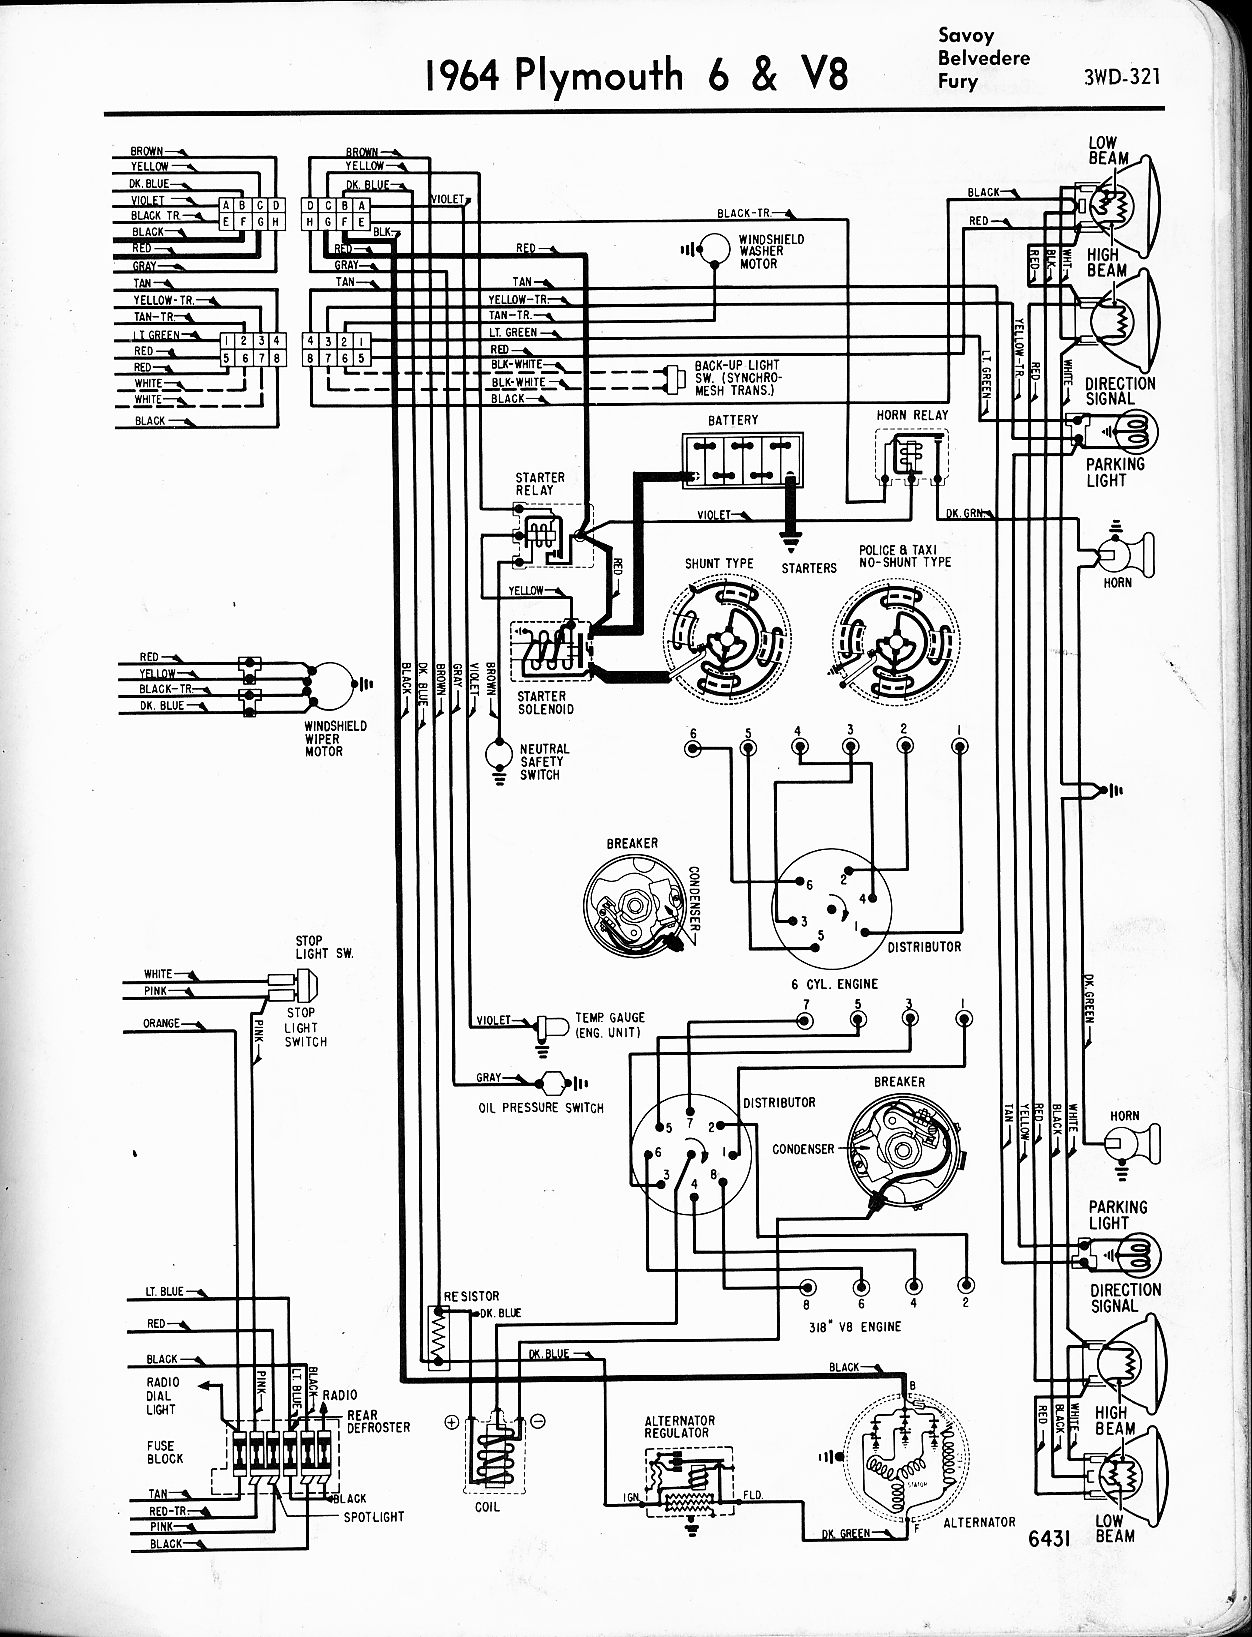 1966 Plymouth Valiant Wiring Diagram | Wiring Library